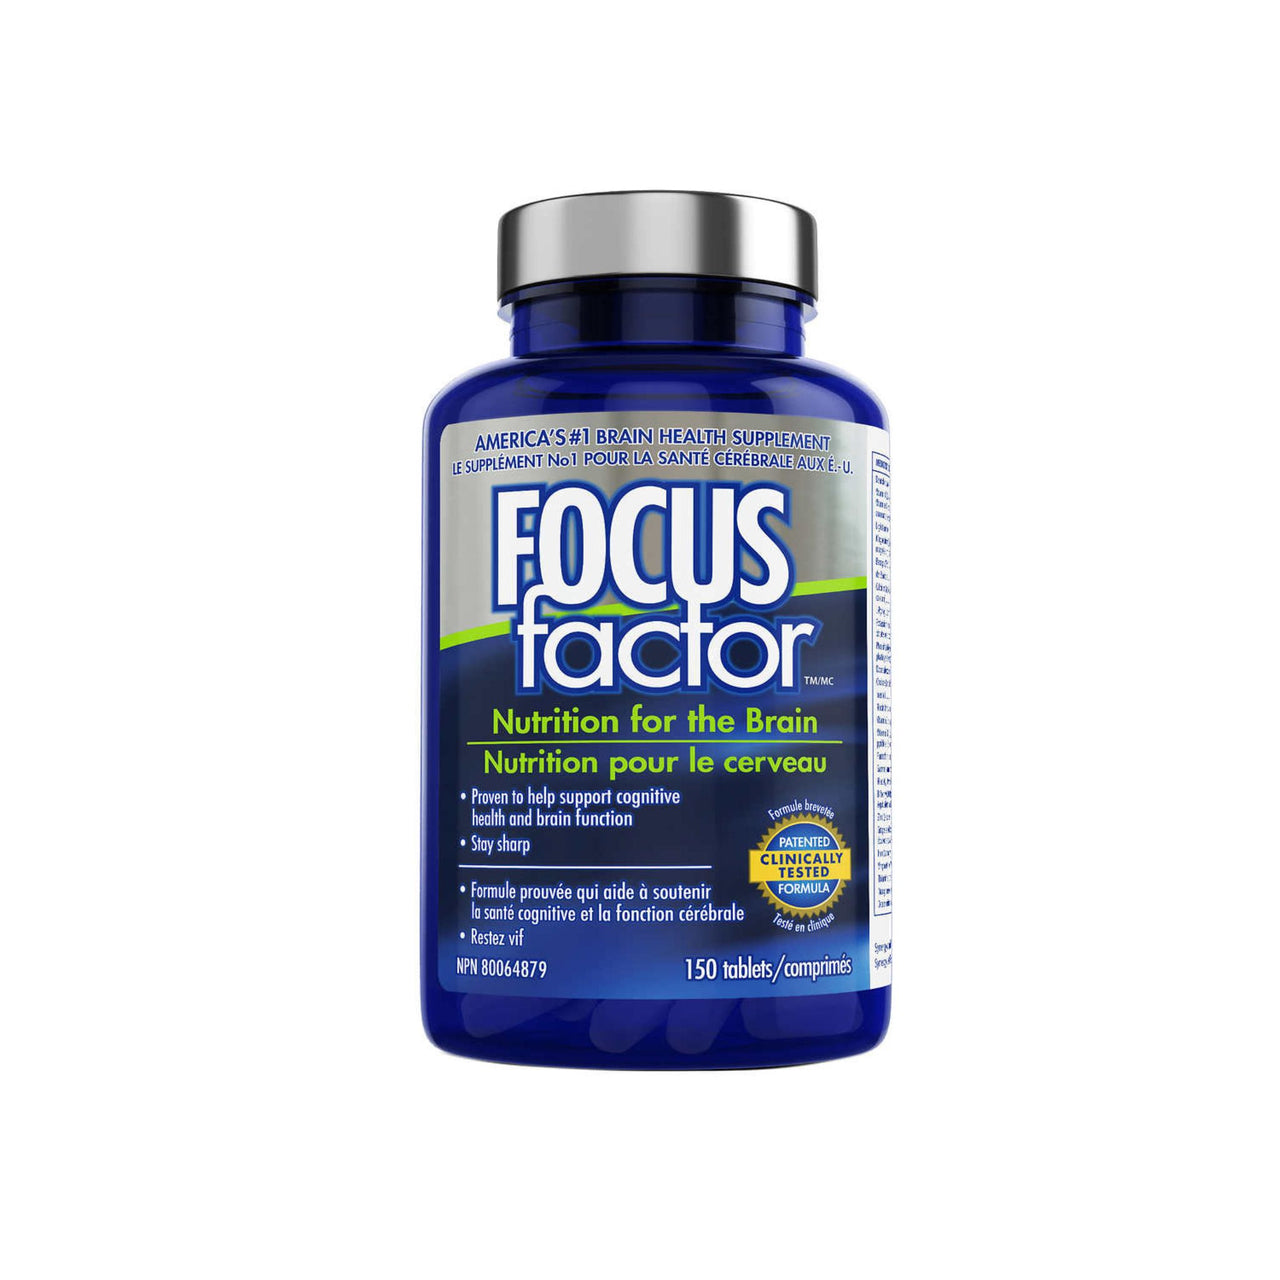 Image of Focus Factor Nutrition for the Brain - 150 Tablets